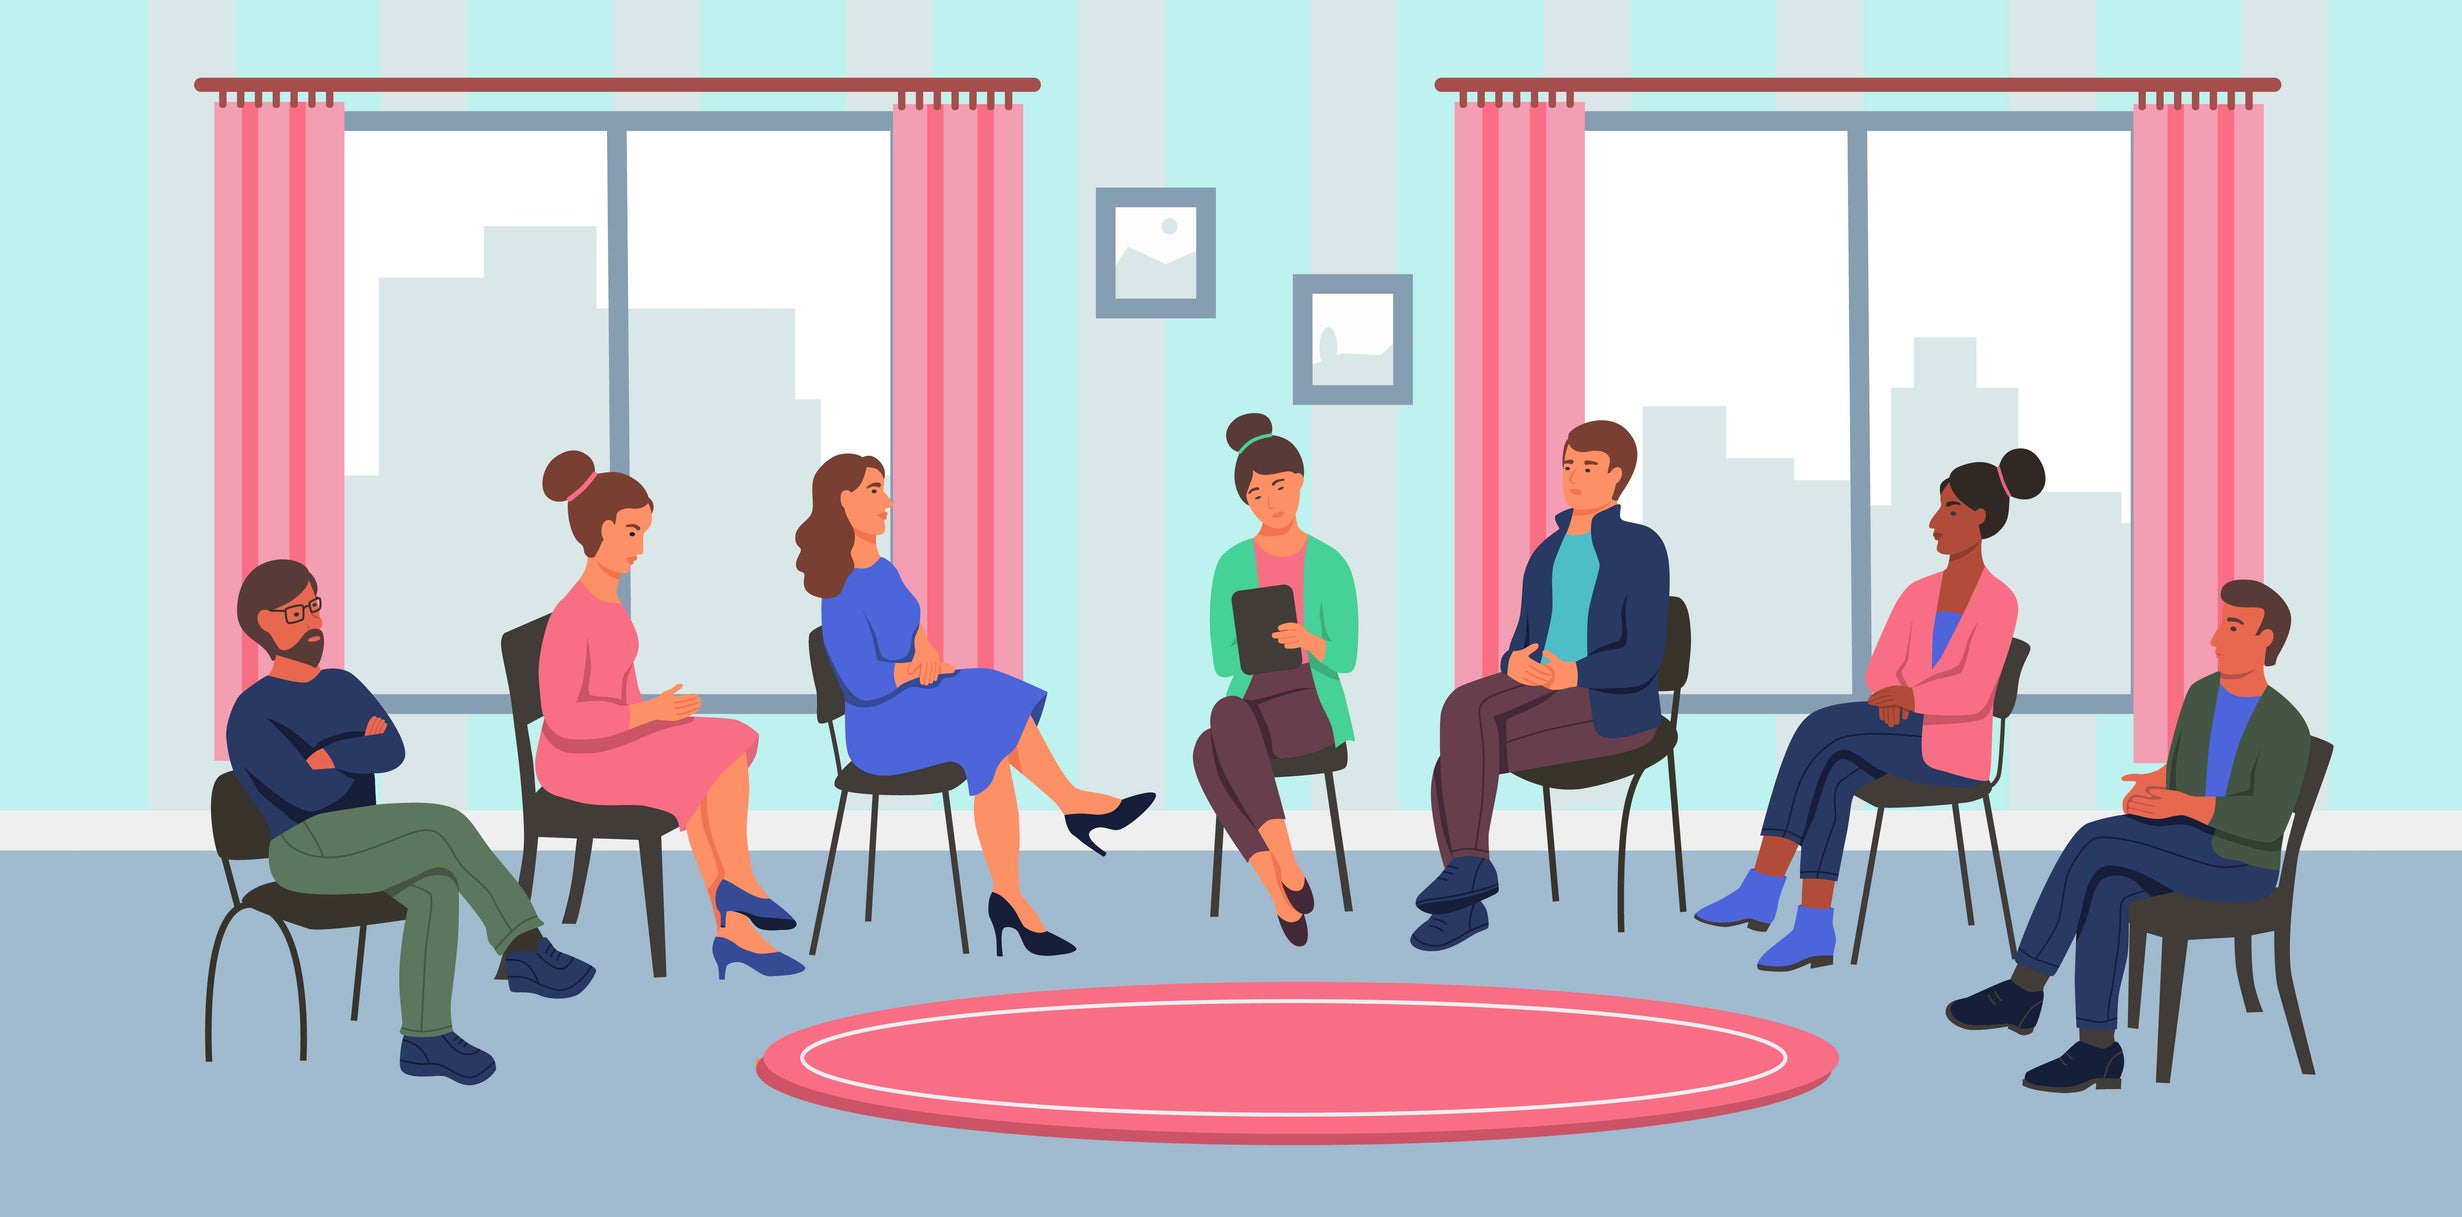 illustration of diverse people sitting in a group therapy or counseling session